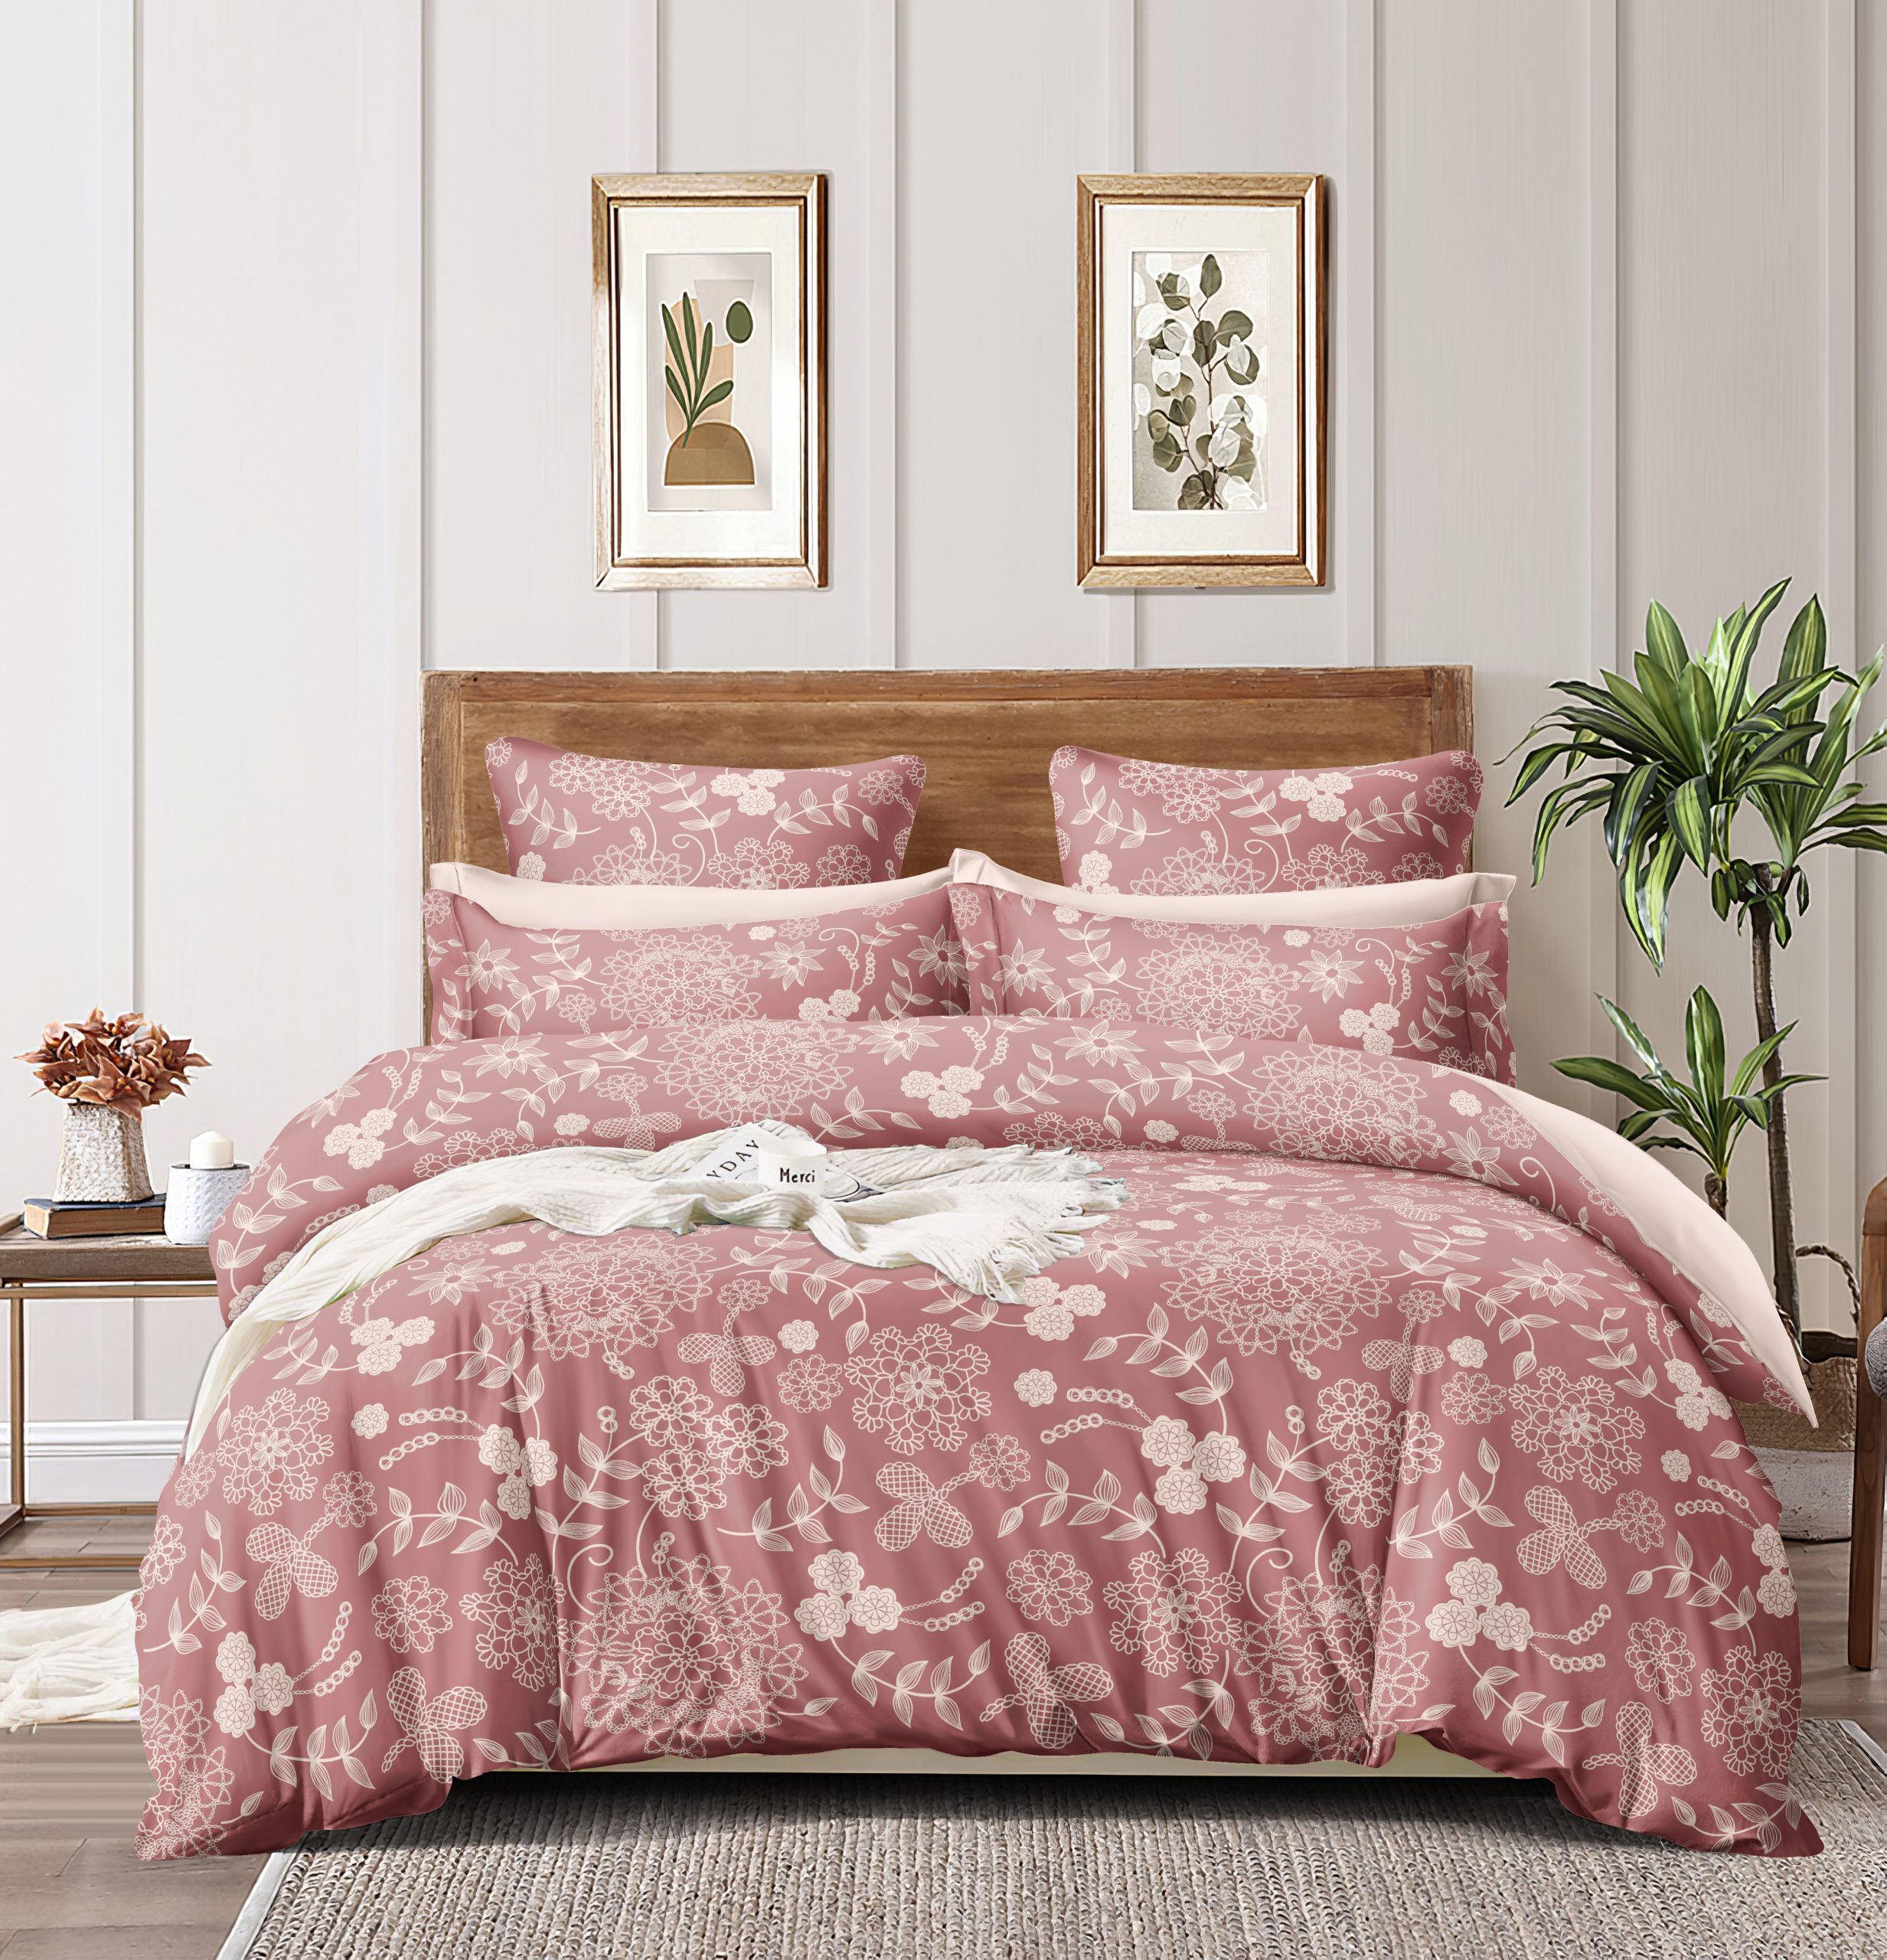 Homewards Pink Garden Mesh Comforter – Soft, Cosy and Colour Fade Resistant